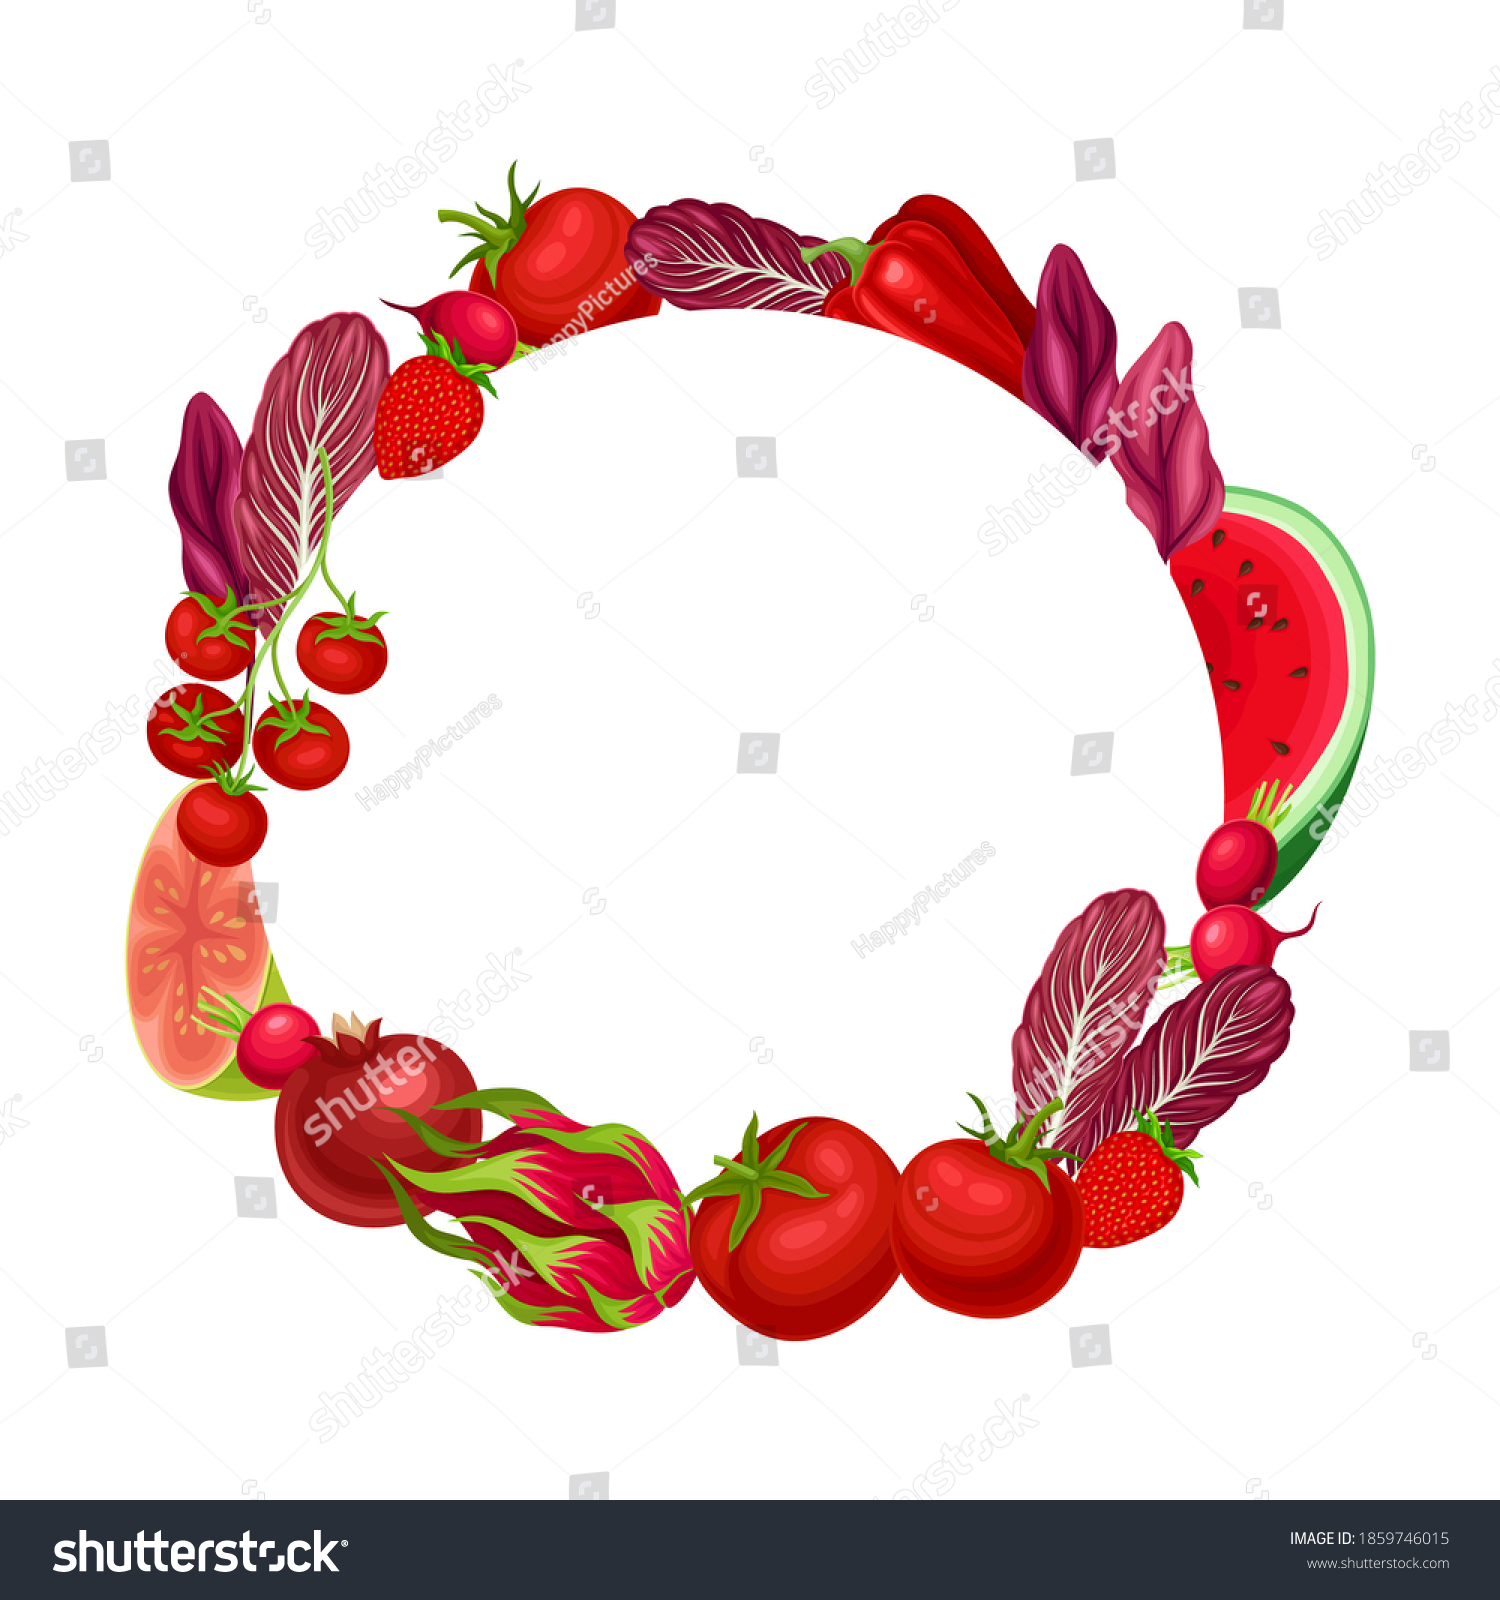 SVG of Round Frame of Ripe and Juicy Fruit and Vegetables Vector Illustration svg